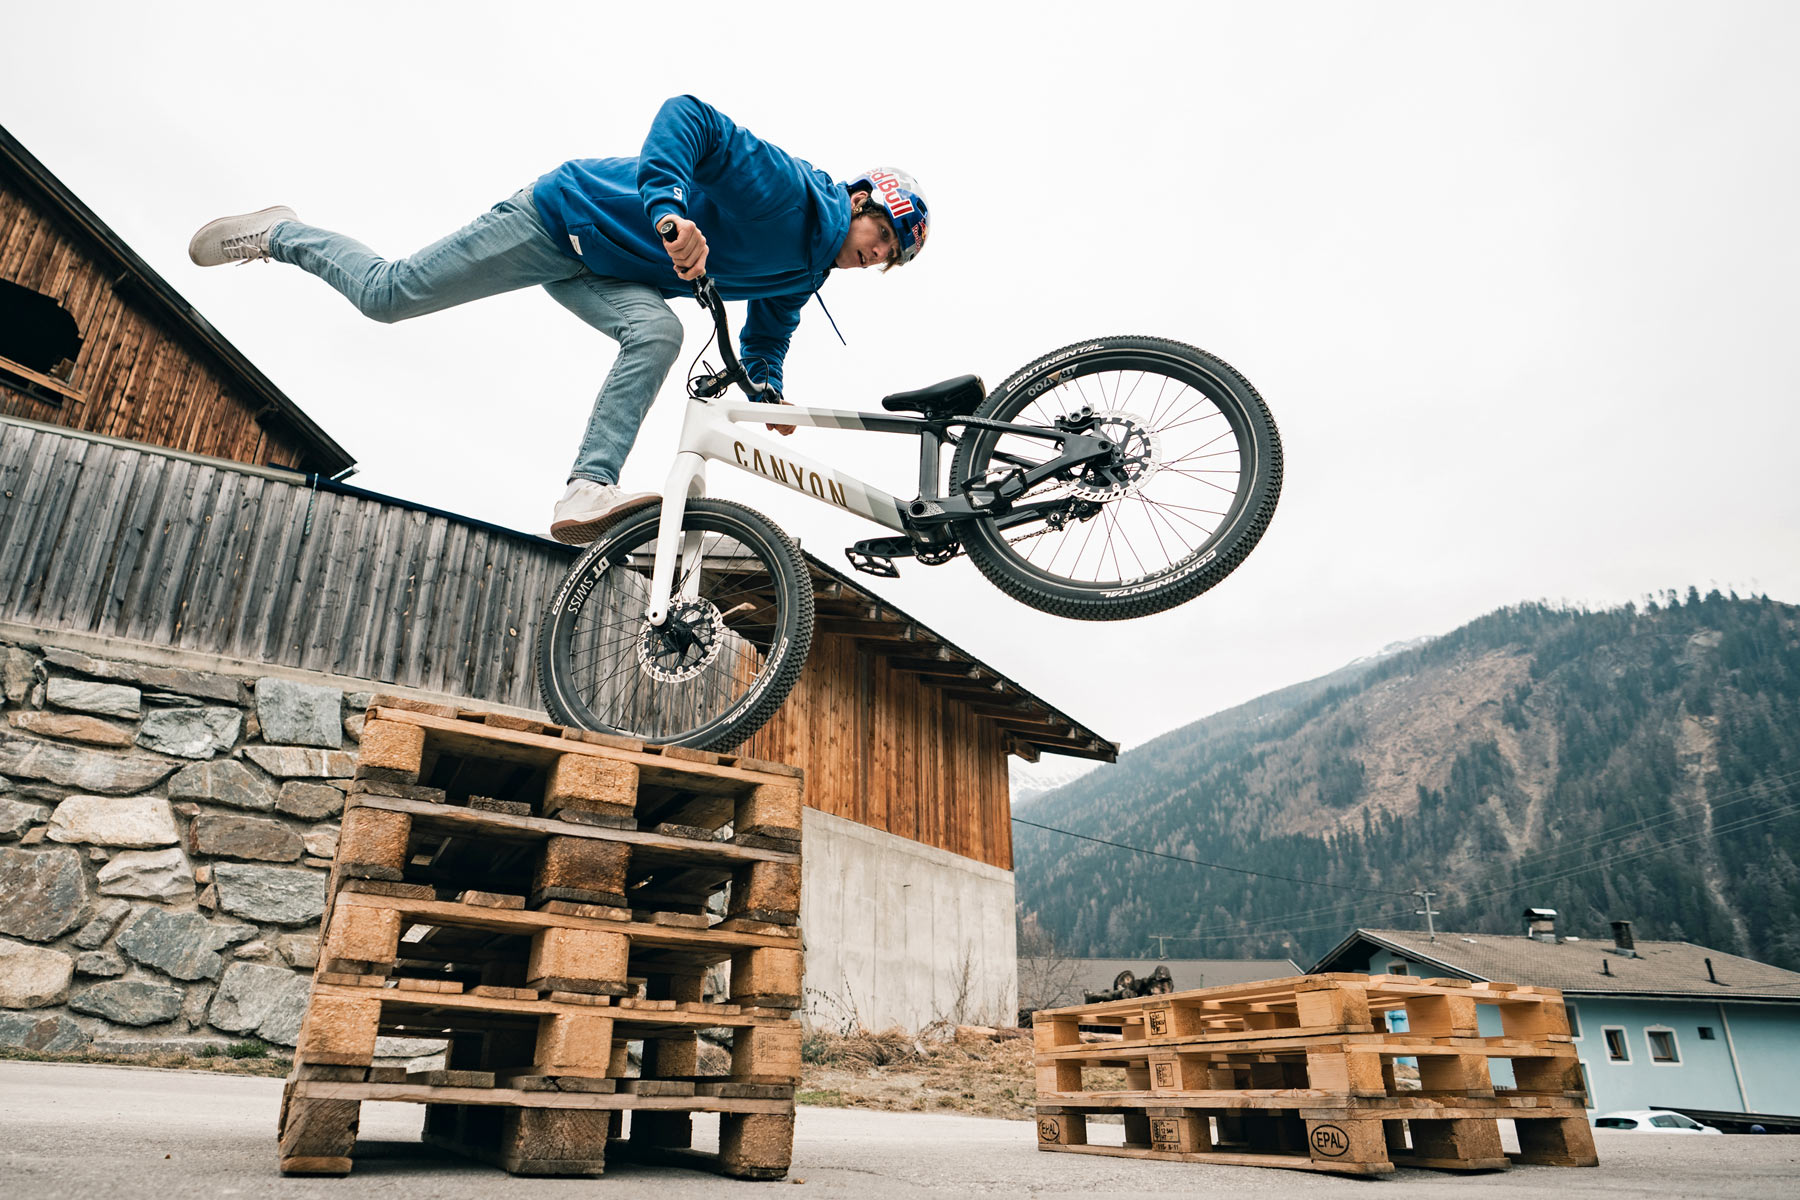 Canyon Stitched CFR Trial carbon street trials bike, photo by Hannes Berger, Euro pallet tricks